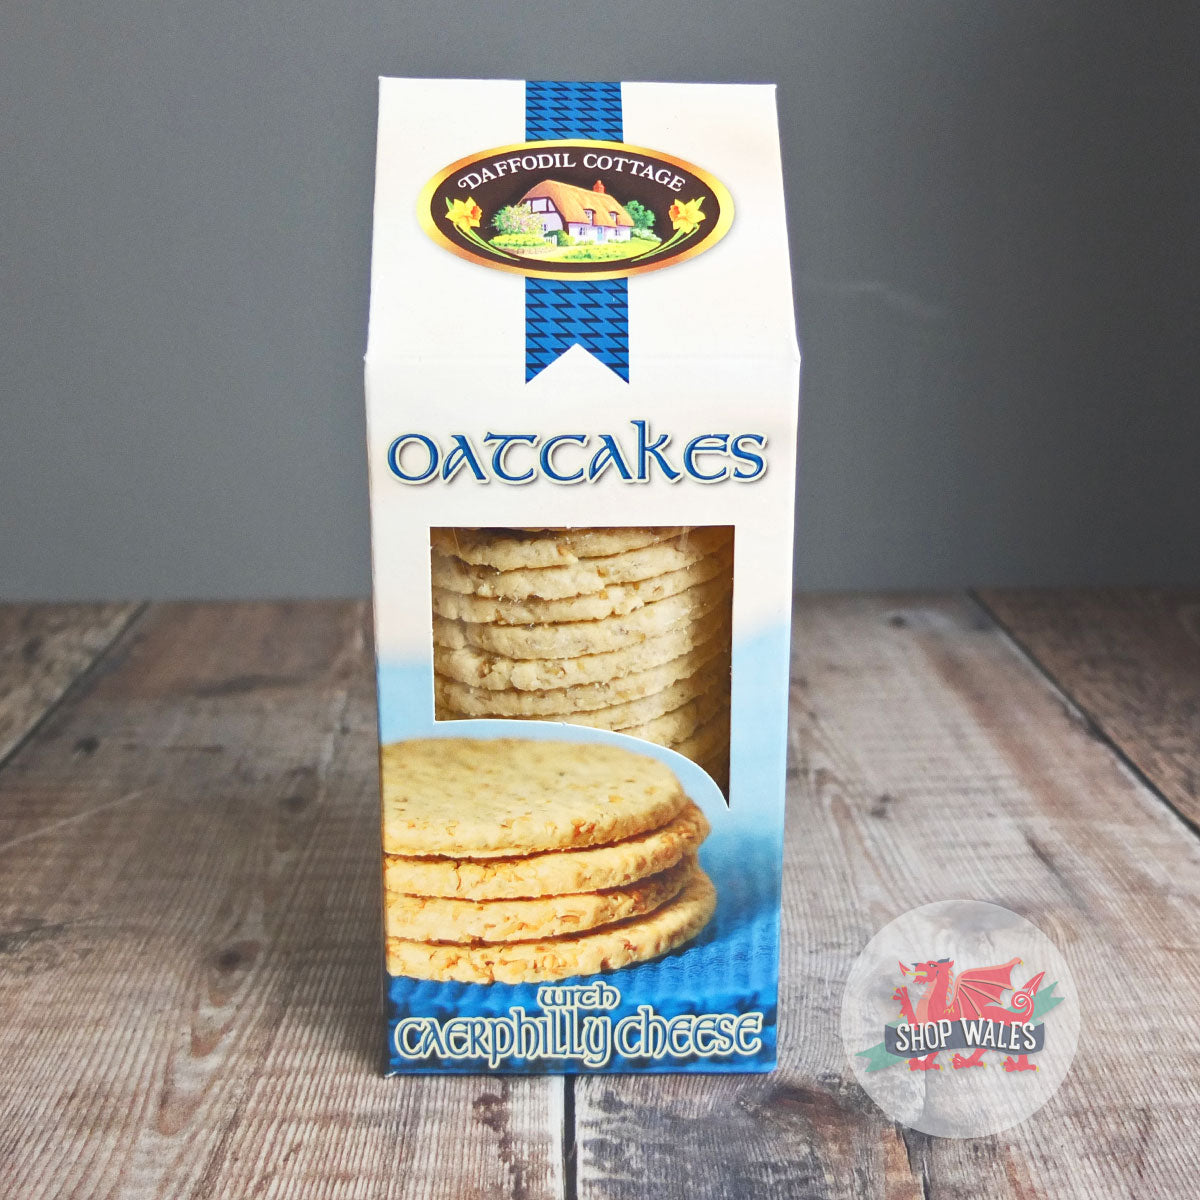 Oatcakes with Caerphilly Cheese